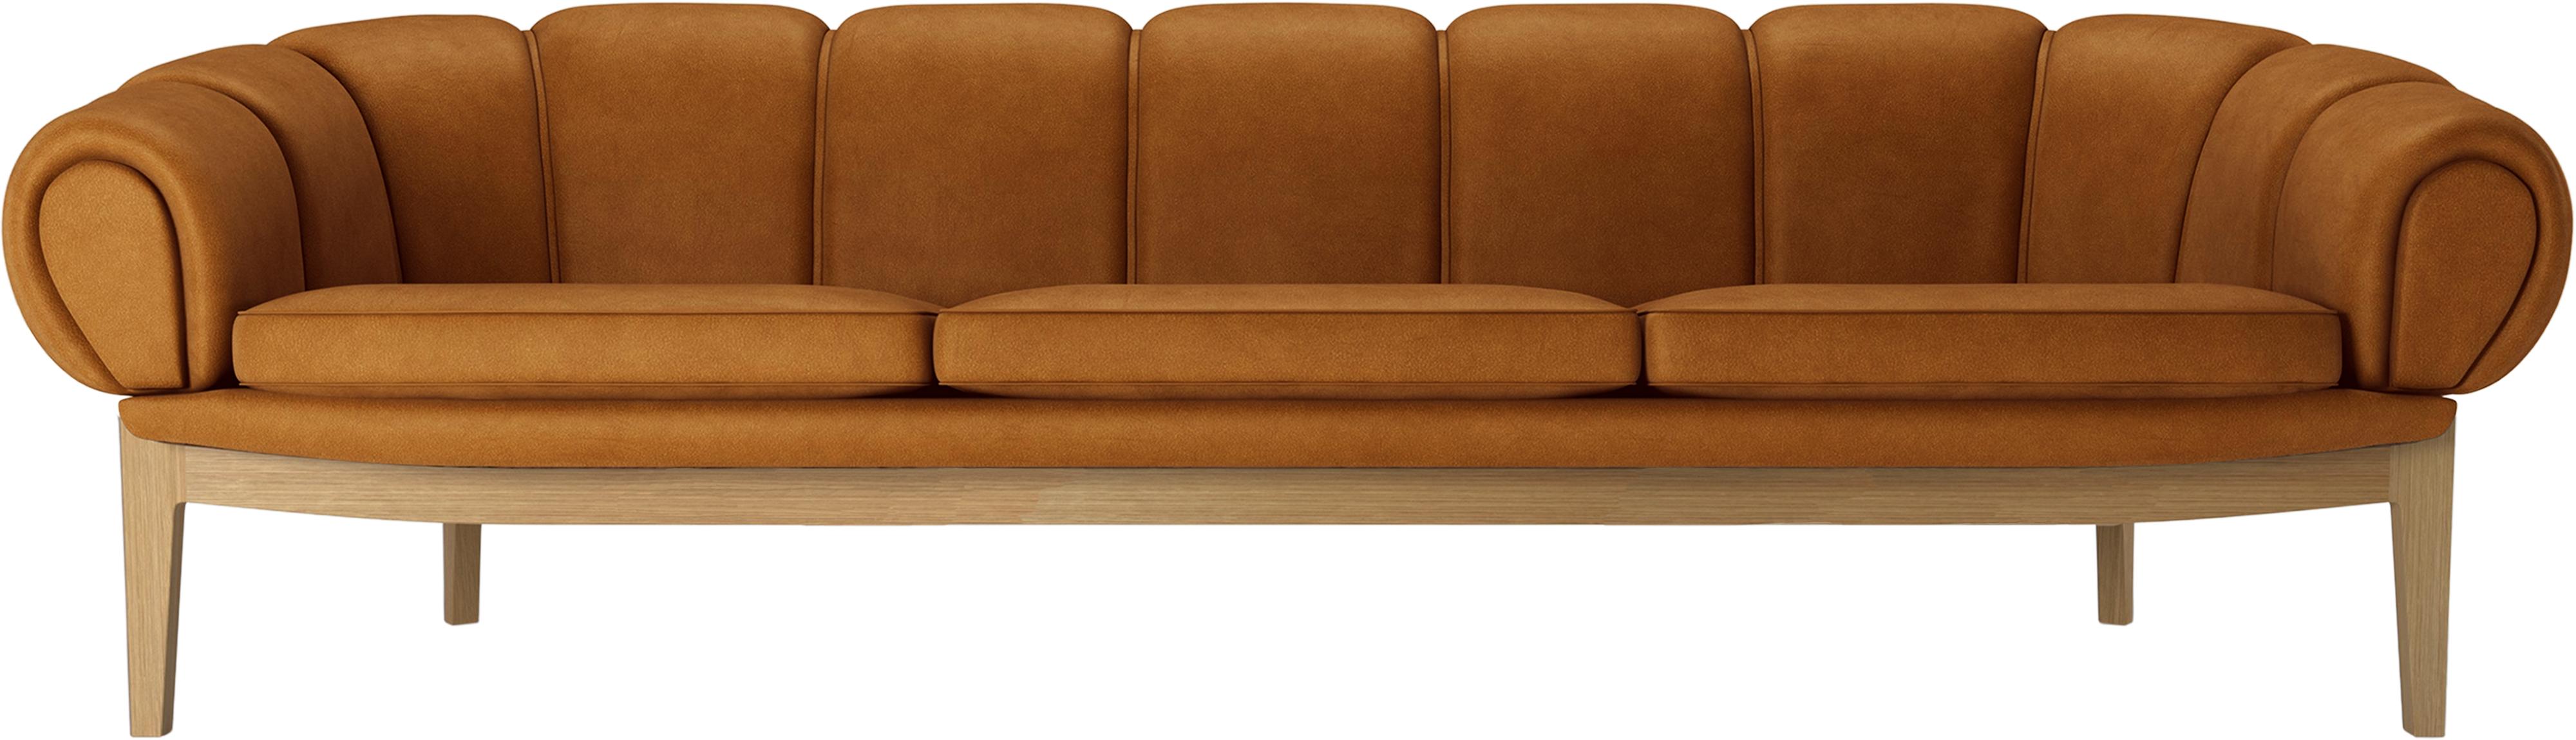 Leather 'Croissant' Sofa by Illum Wikkelsø for Gubi with Walnut Legs For Sale 9